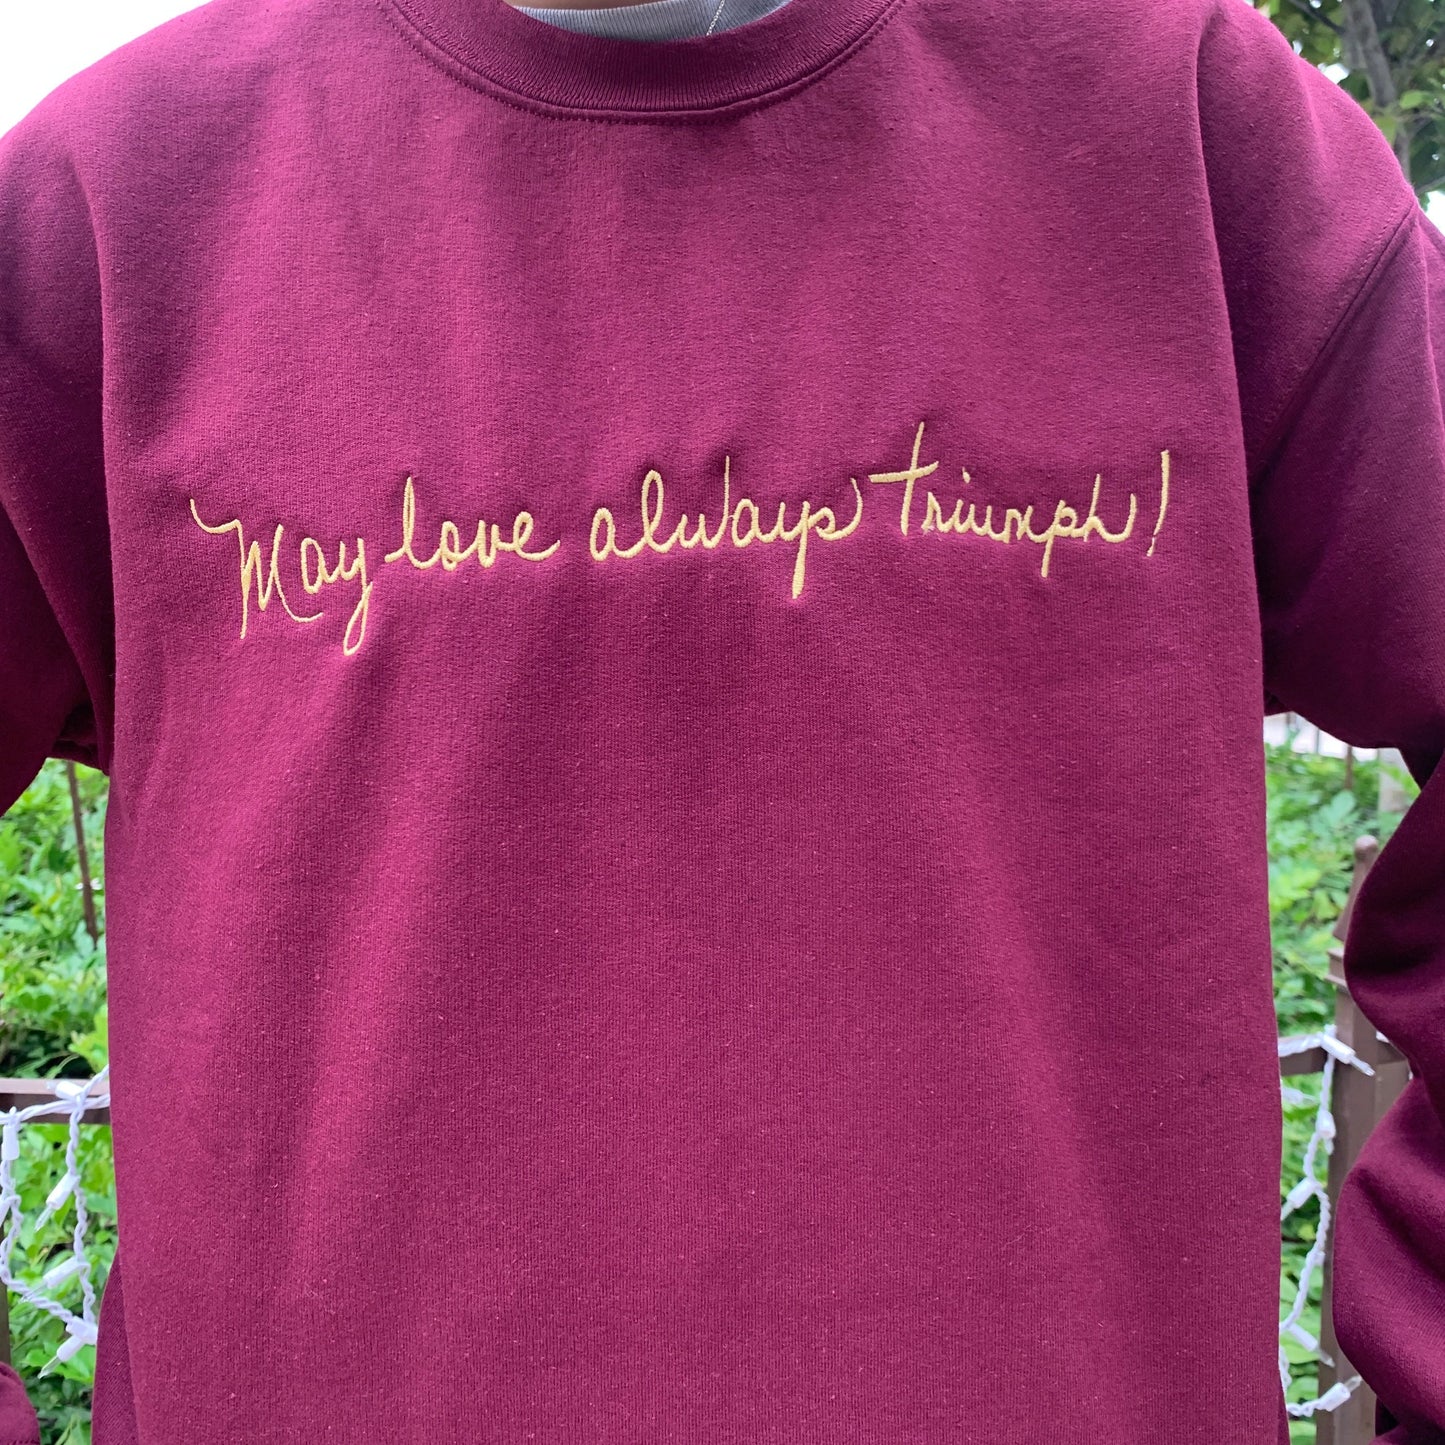 "May love always Triumph" Embroidered Crewneck Sweater by SCTJM